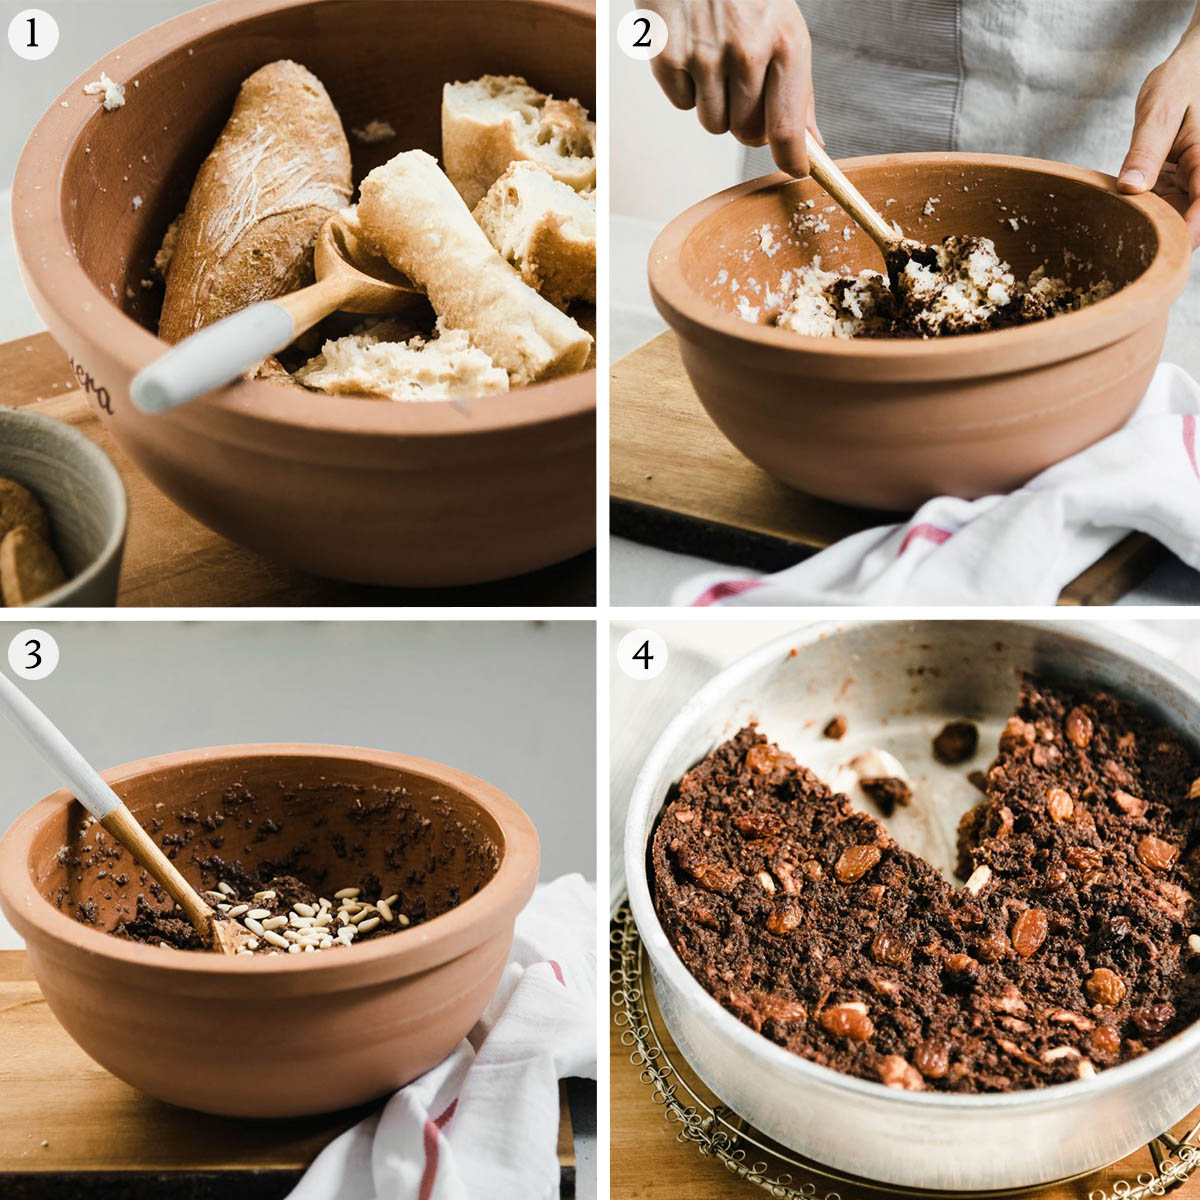 Chocolate bread pudding steps 1 to 4.